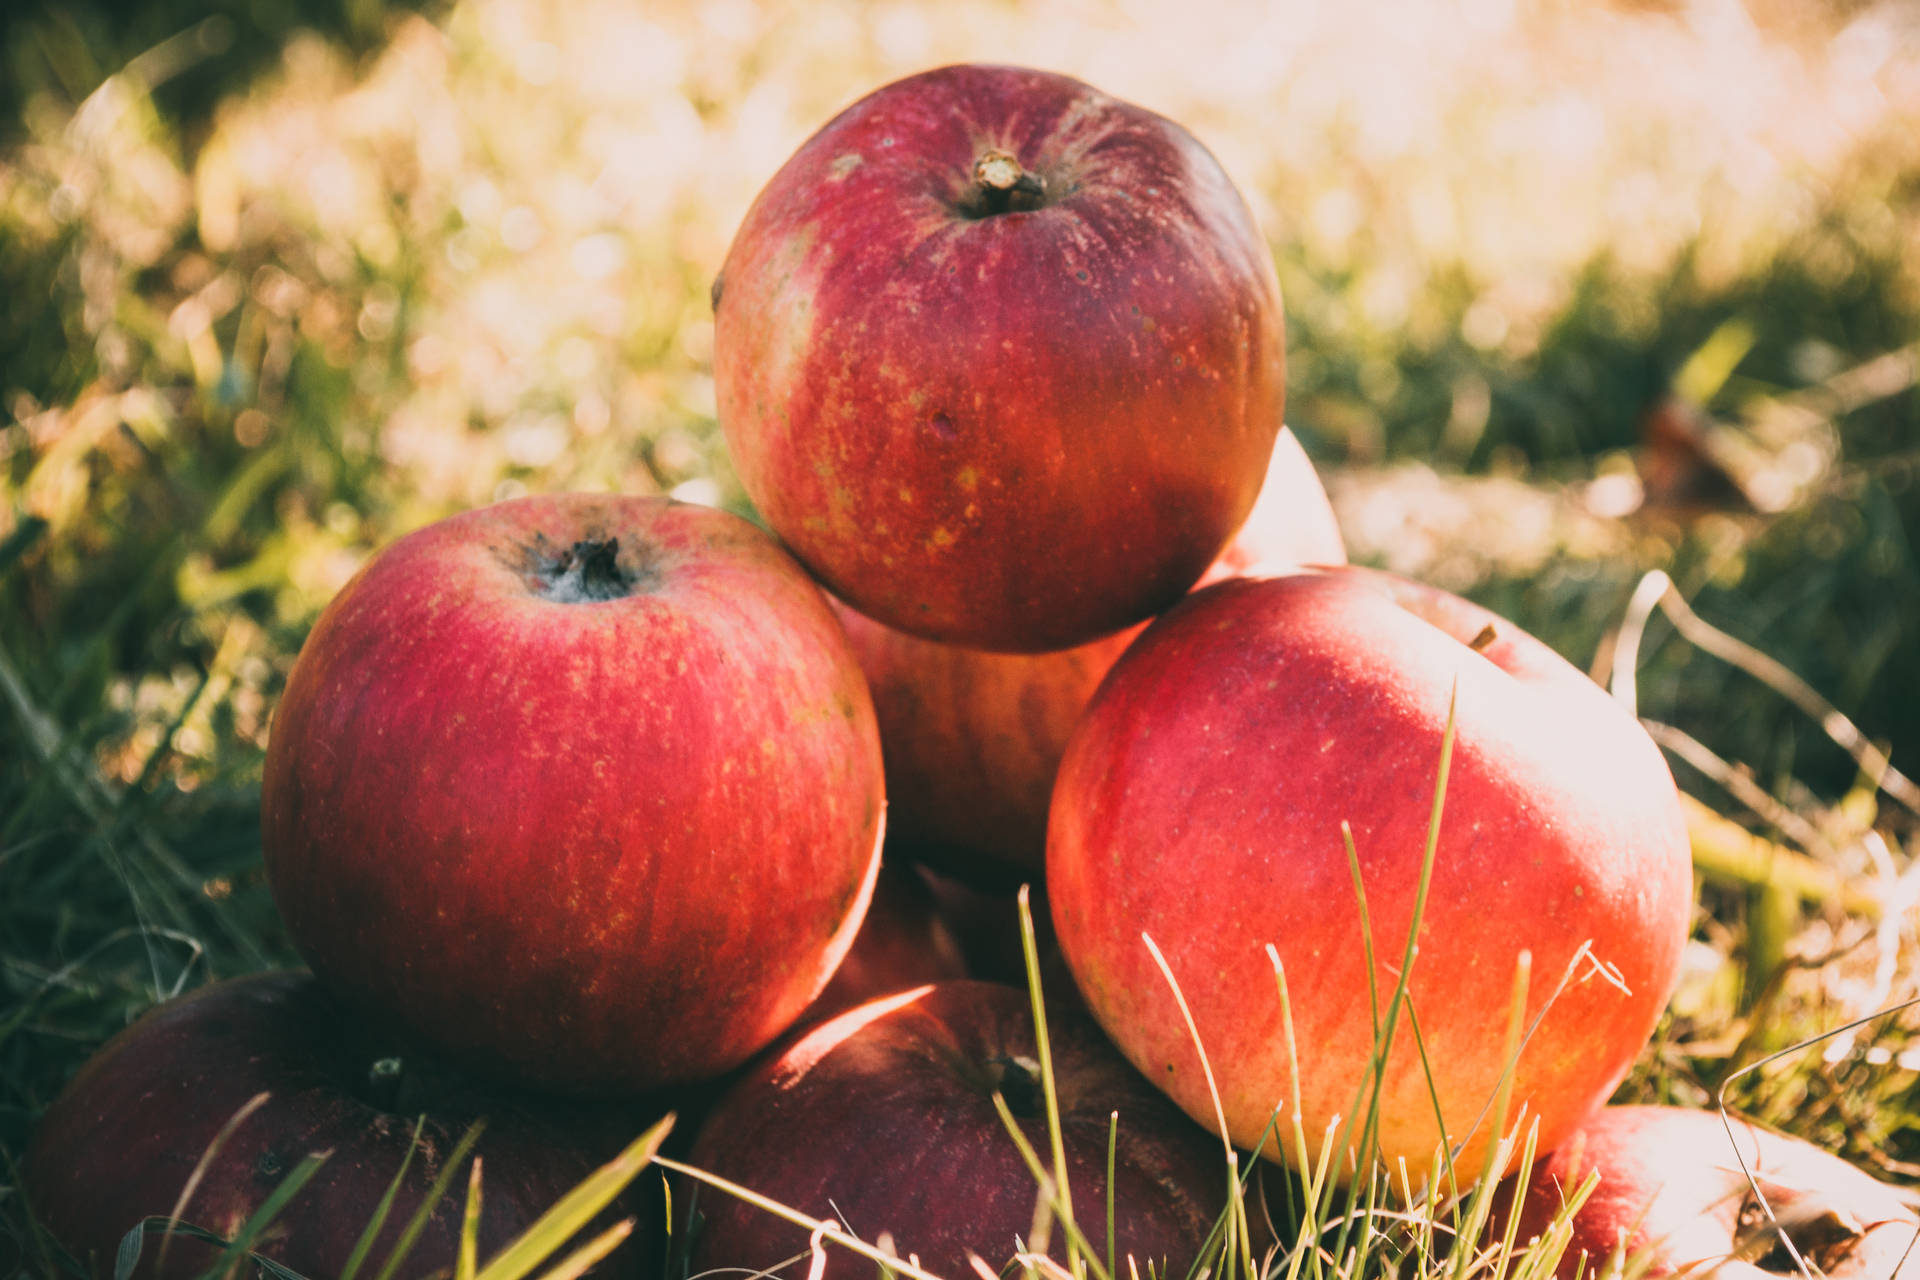 Red Apple Fruits On Grass Field Background